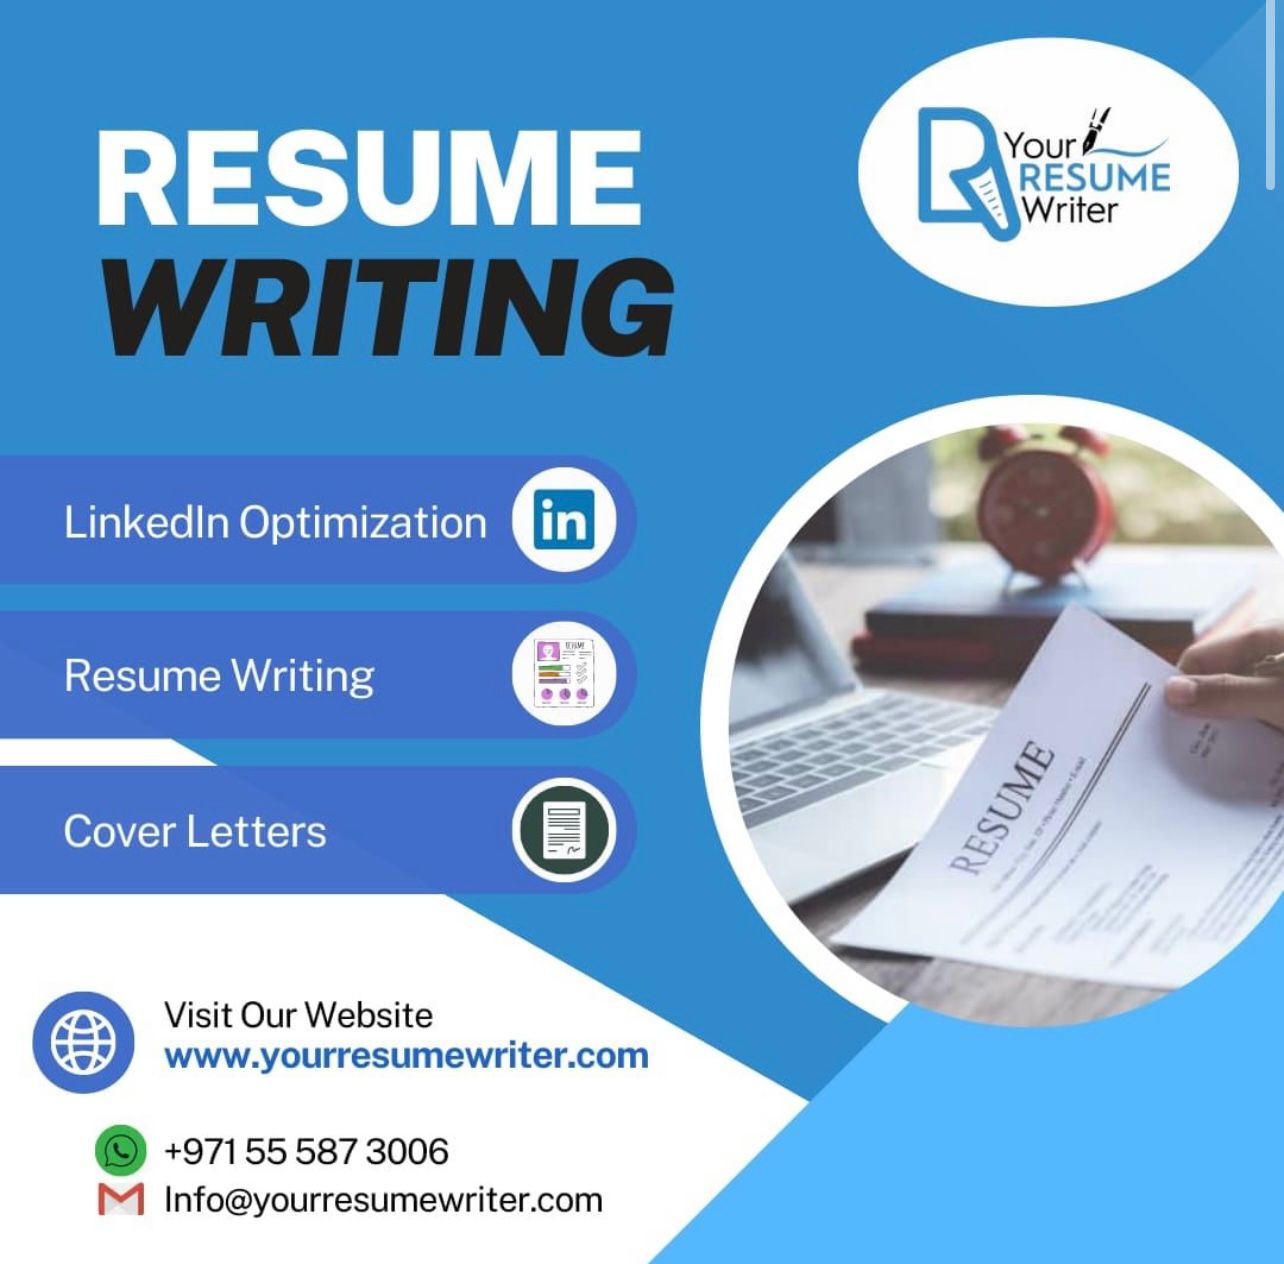 YOUR-RESUME-WRITER